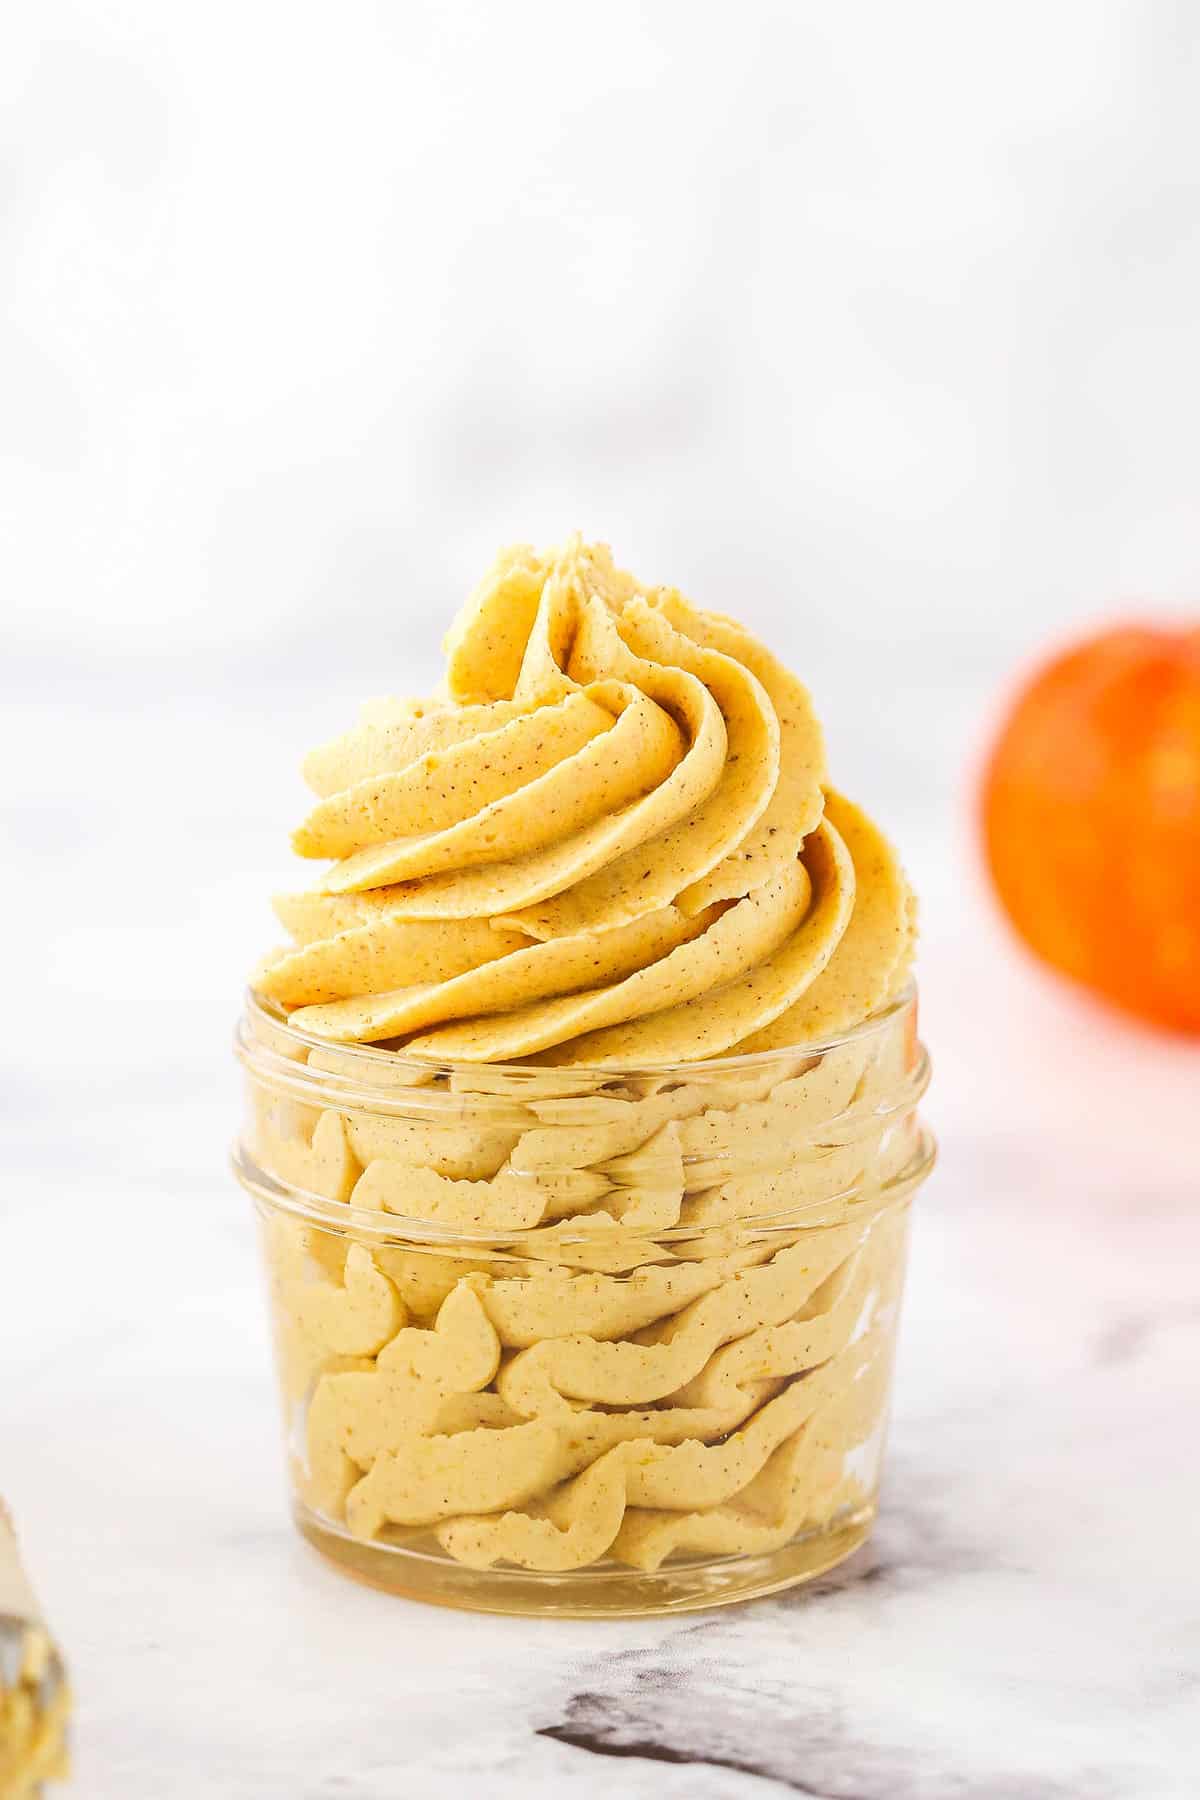 Pumpkin Spice Buttercream Frosting piped into a clear glass jar